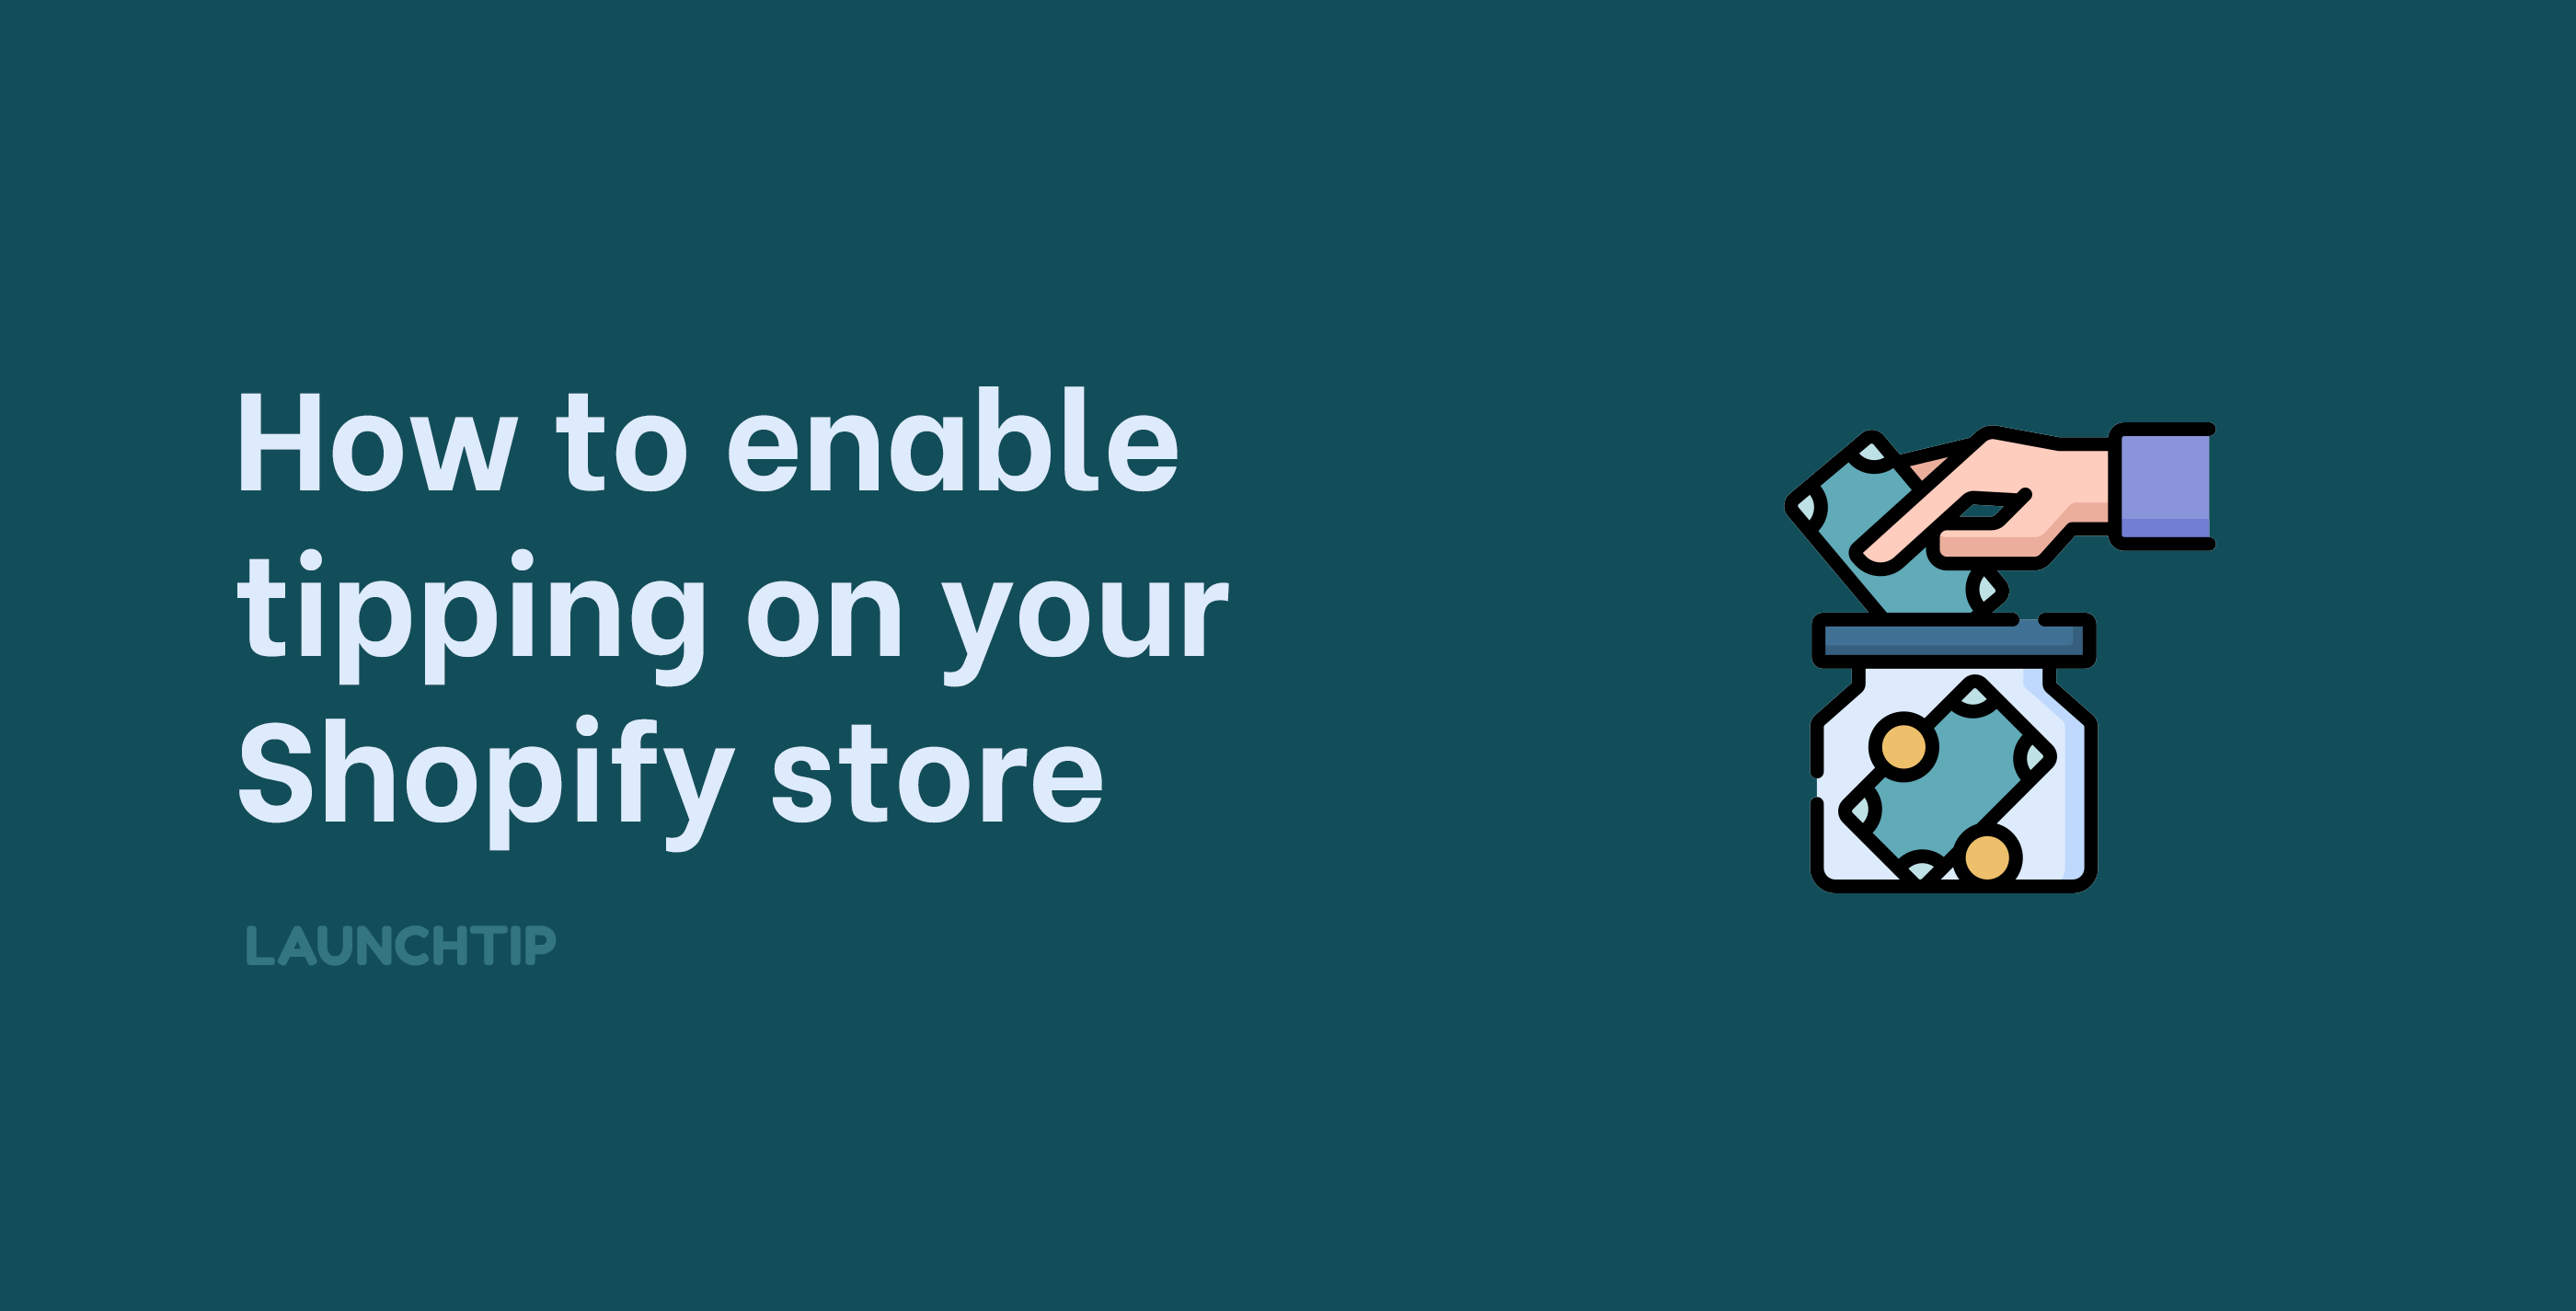 Enable tips on Shopify